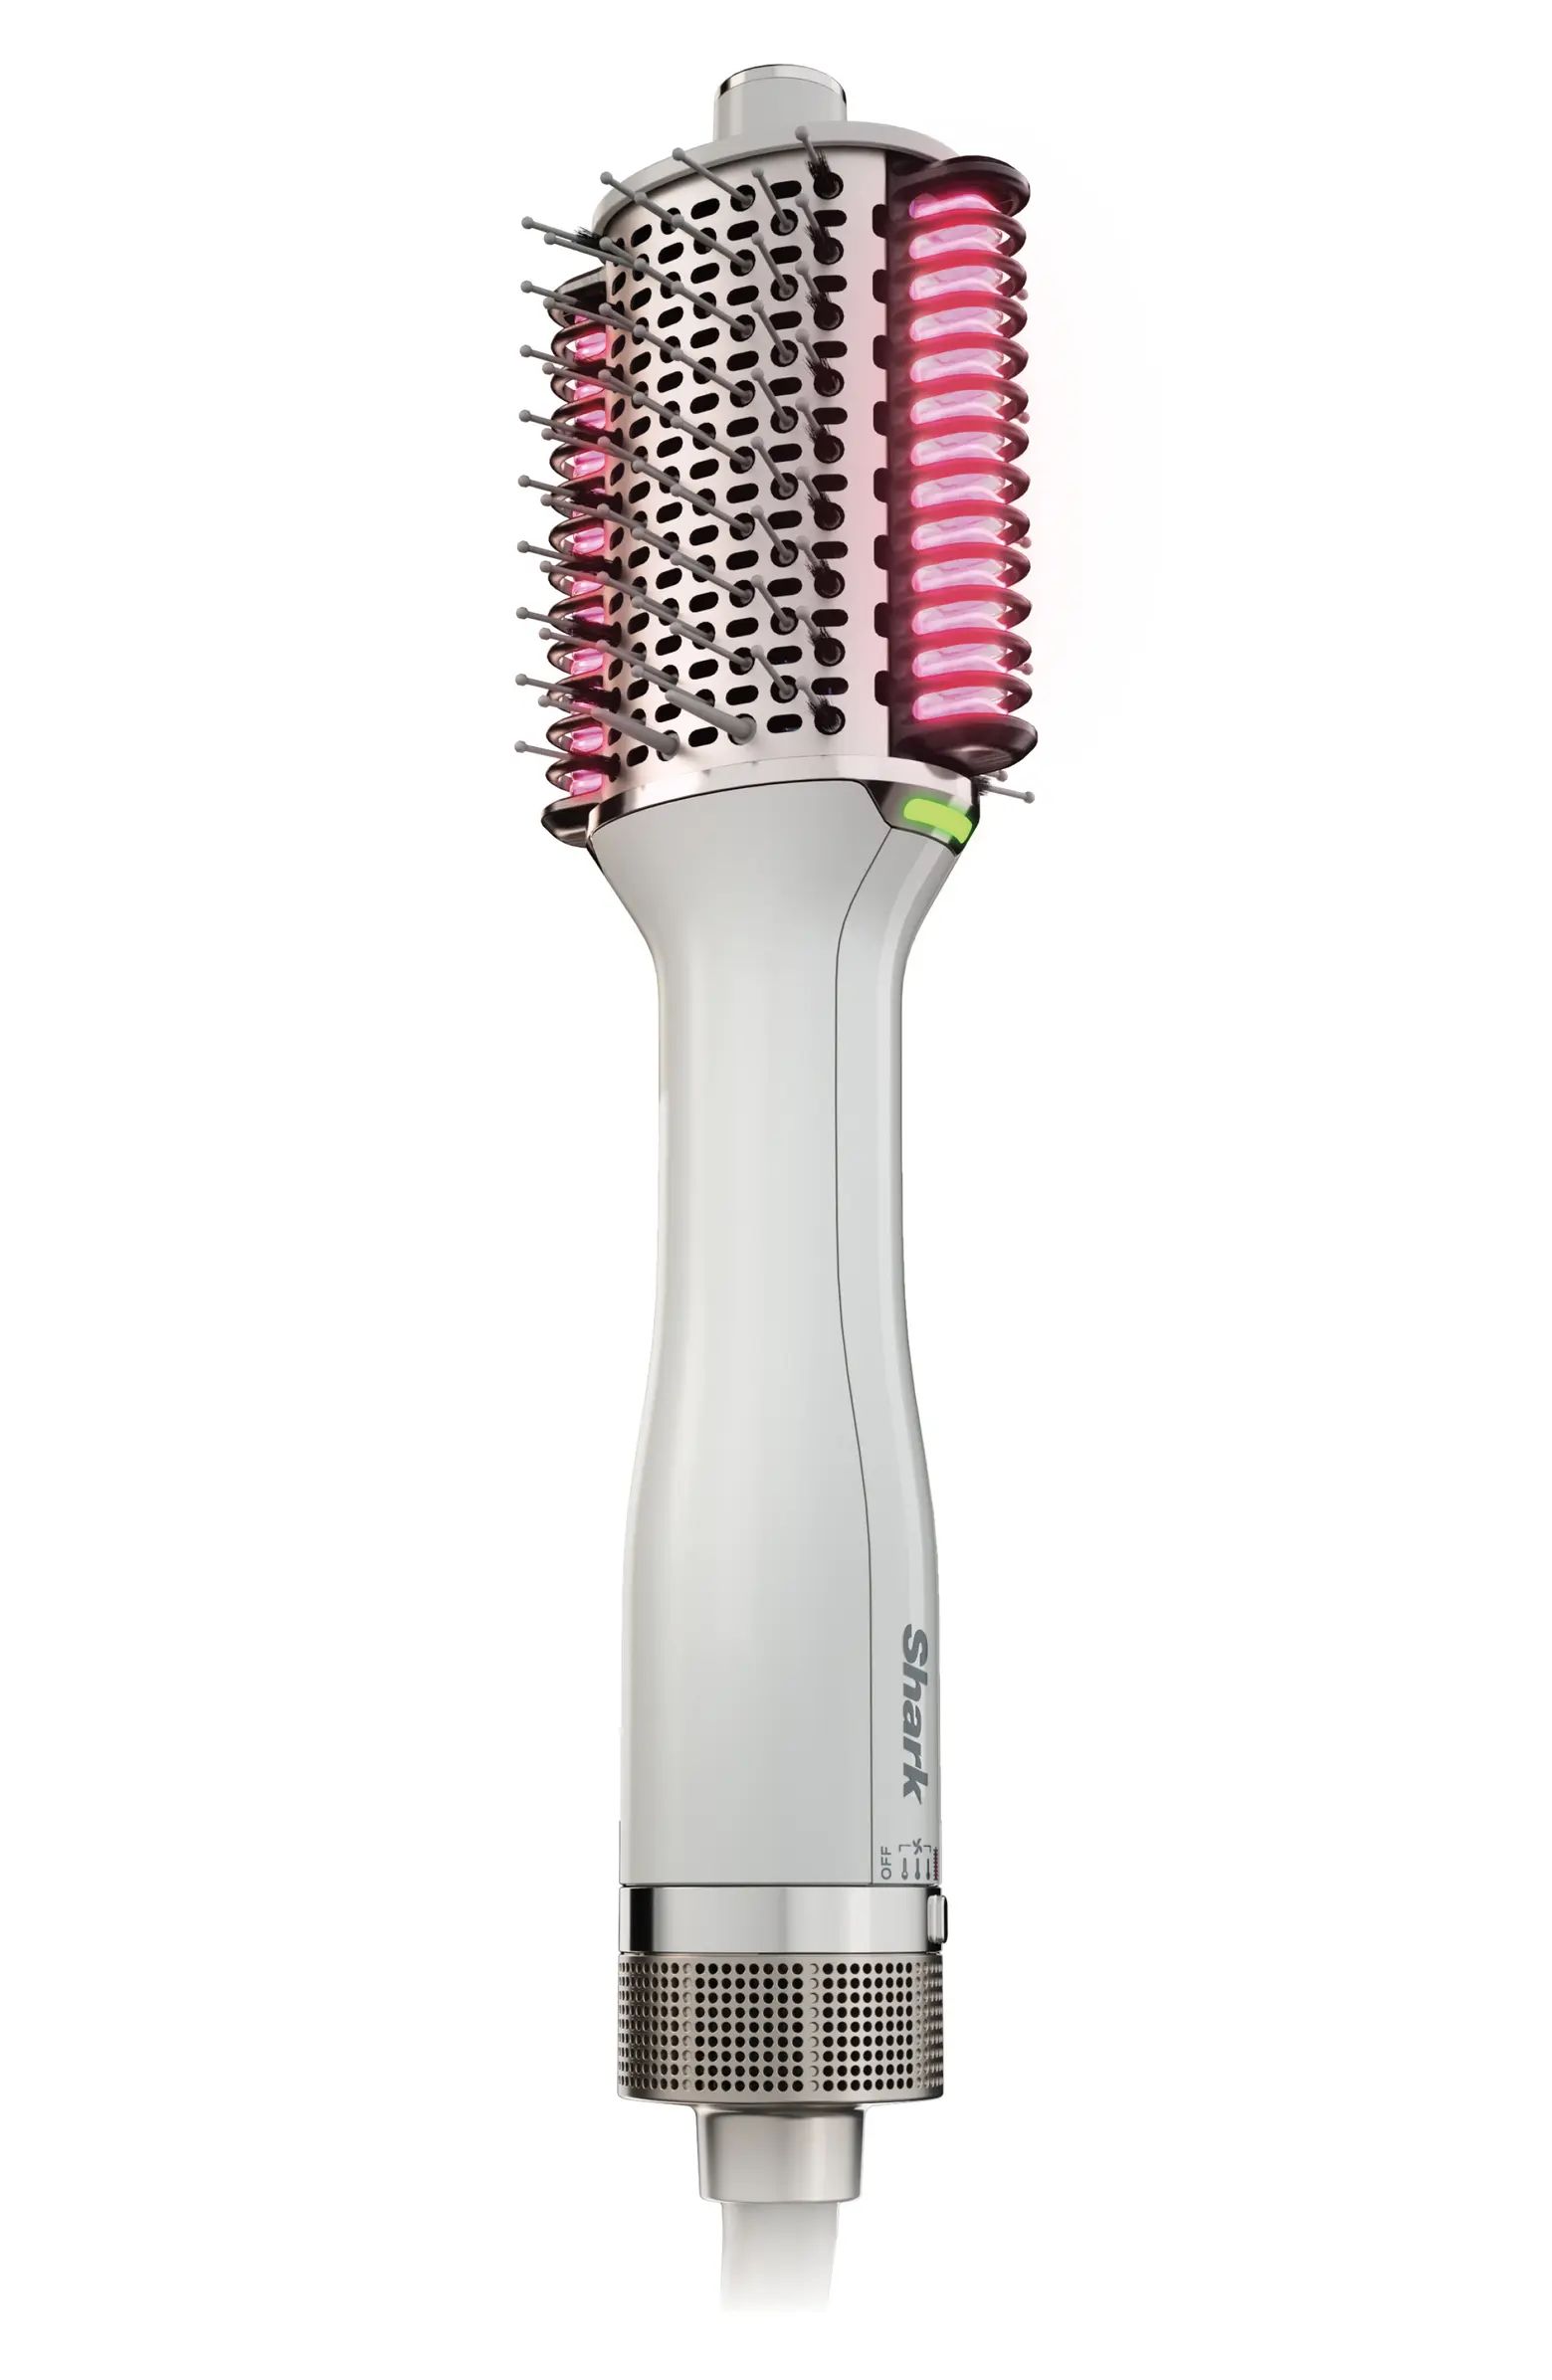 SmoothStyle Heated Comb & Blow Dryer Brush | Nordstrom